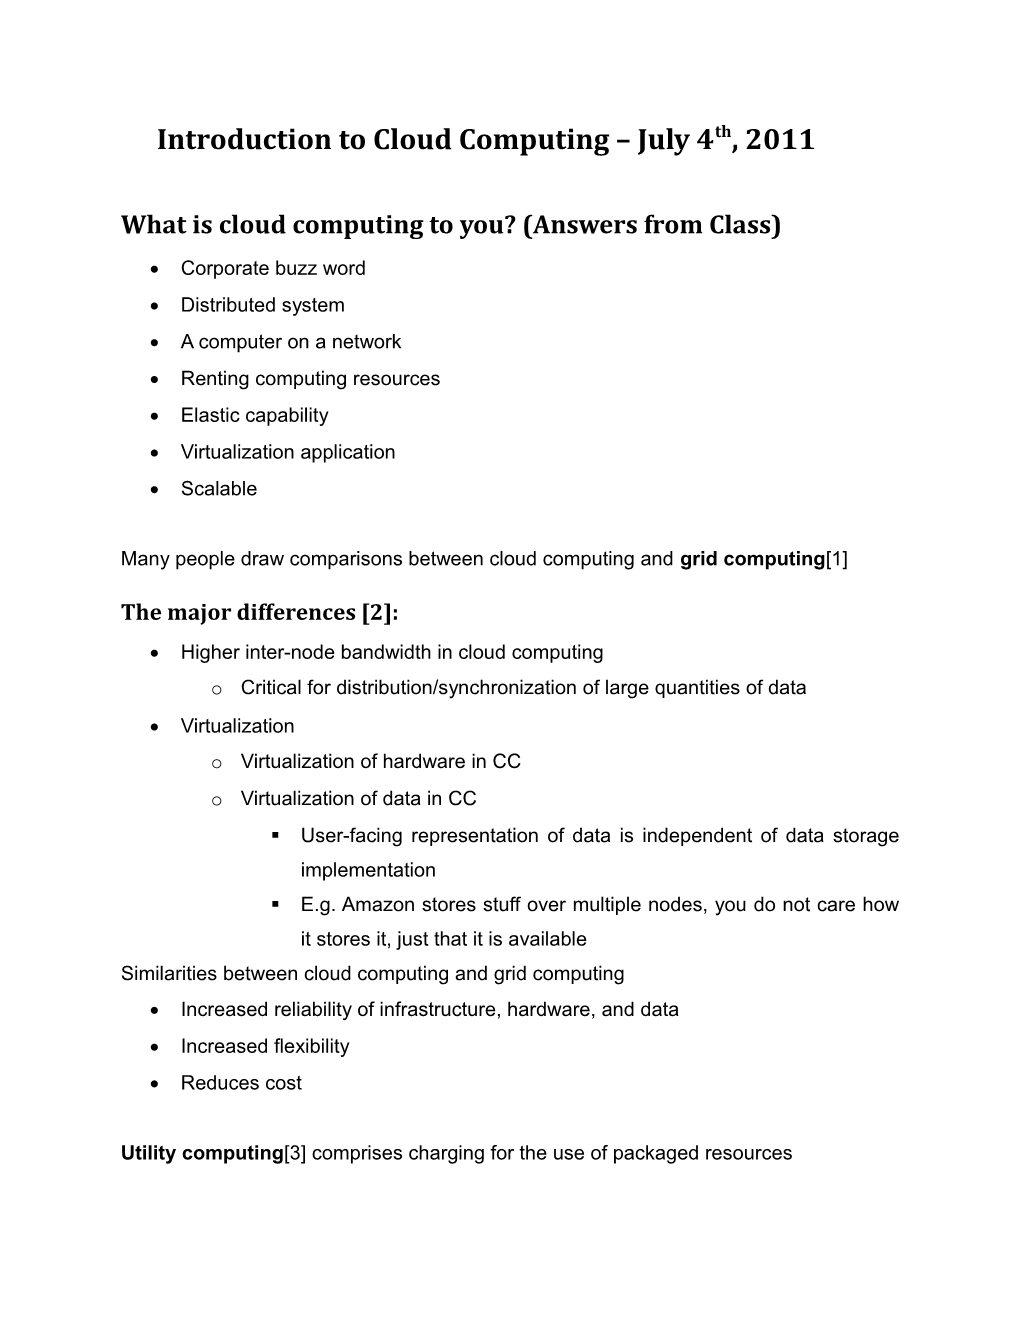 What Is Cloud Computing to You? (Answers from Class)